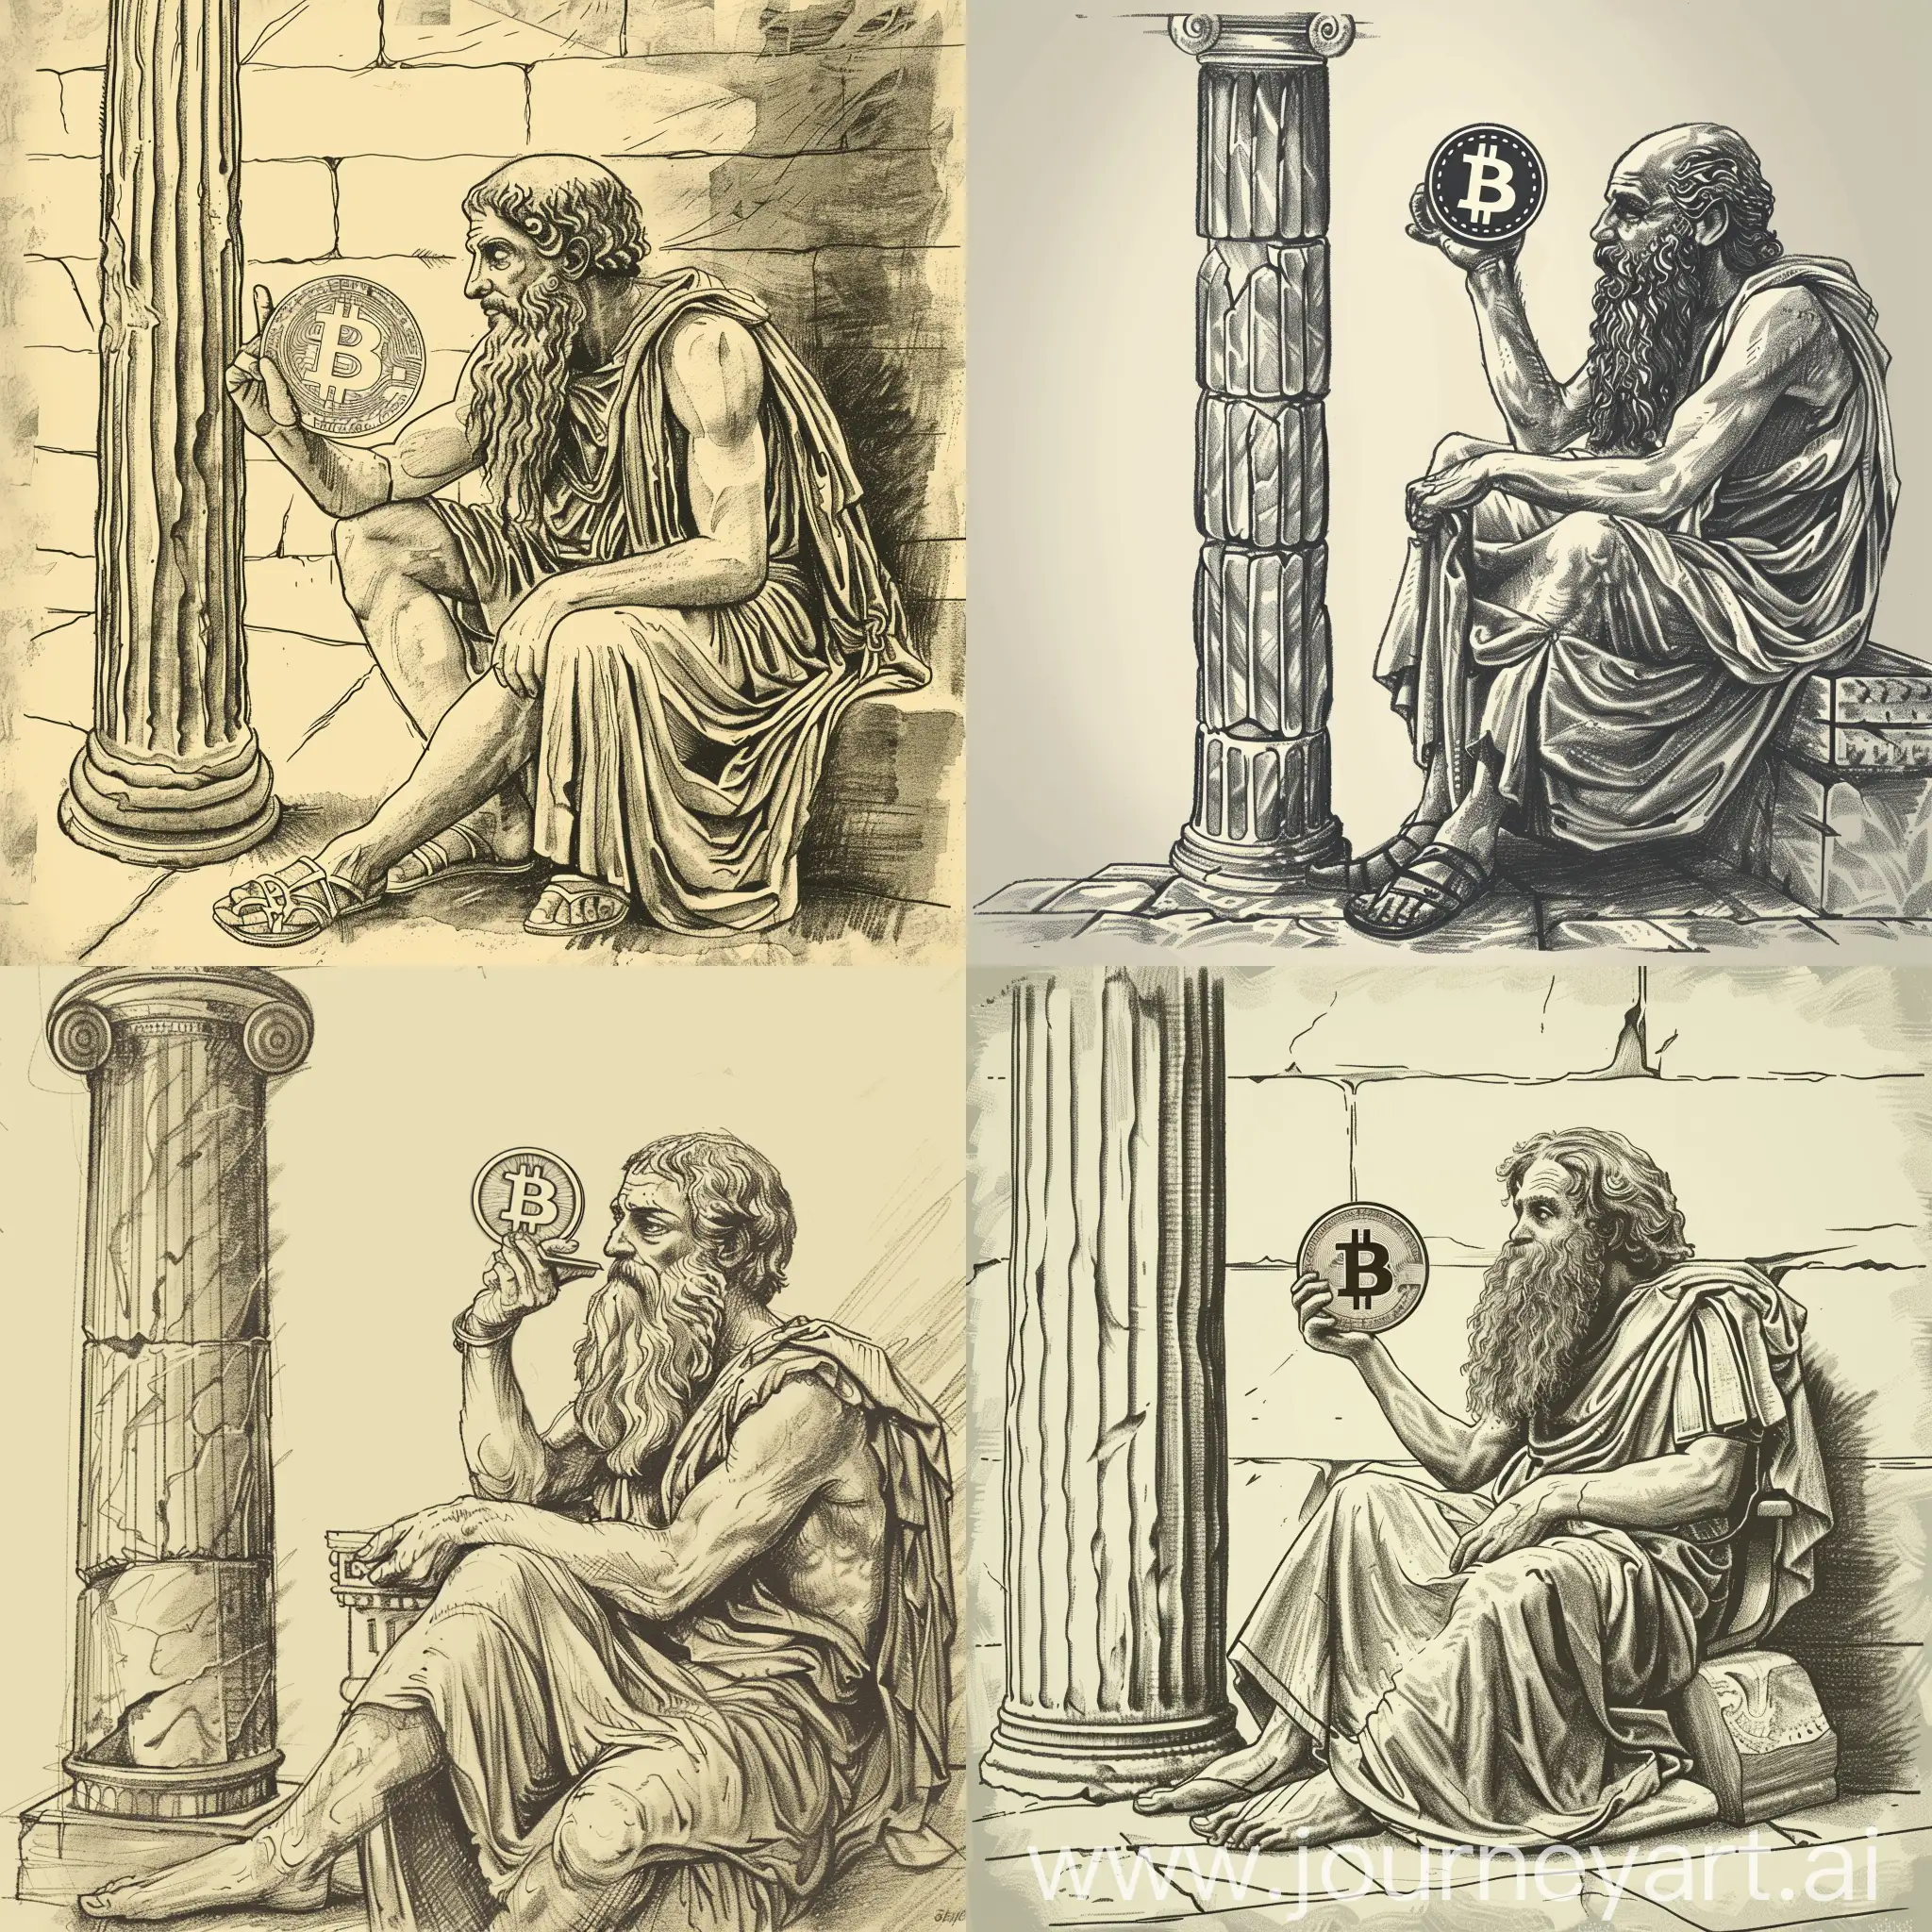 a sketch of Greek philosopher with a long beard sitting near a Greek column thinking and holding a bitcoin symbol in his hand